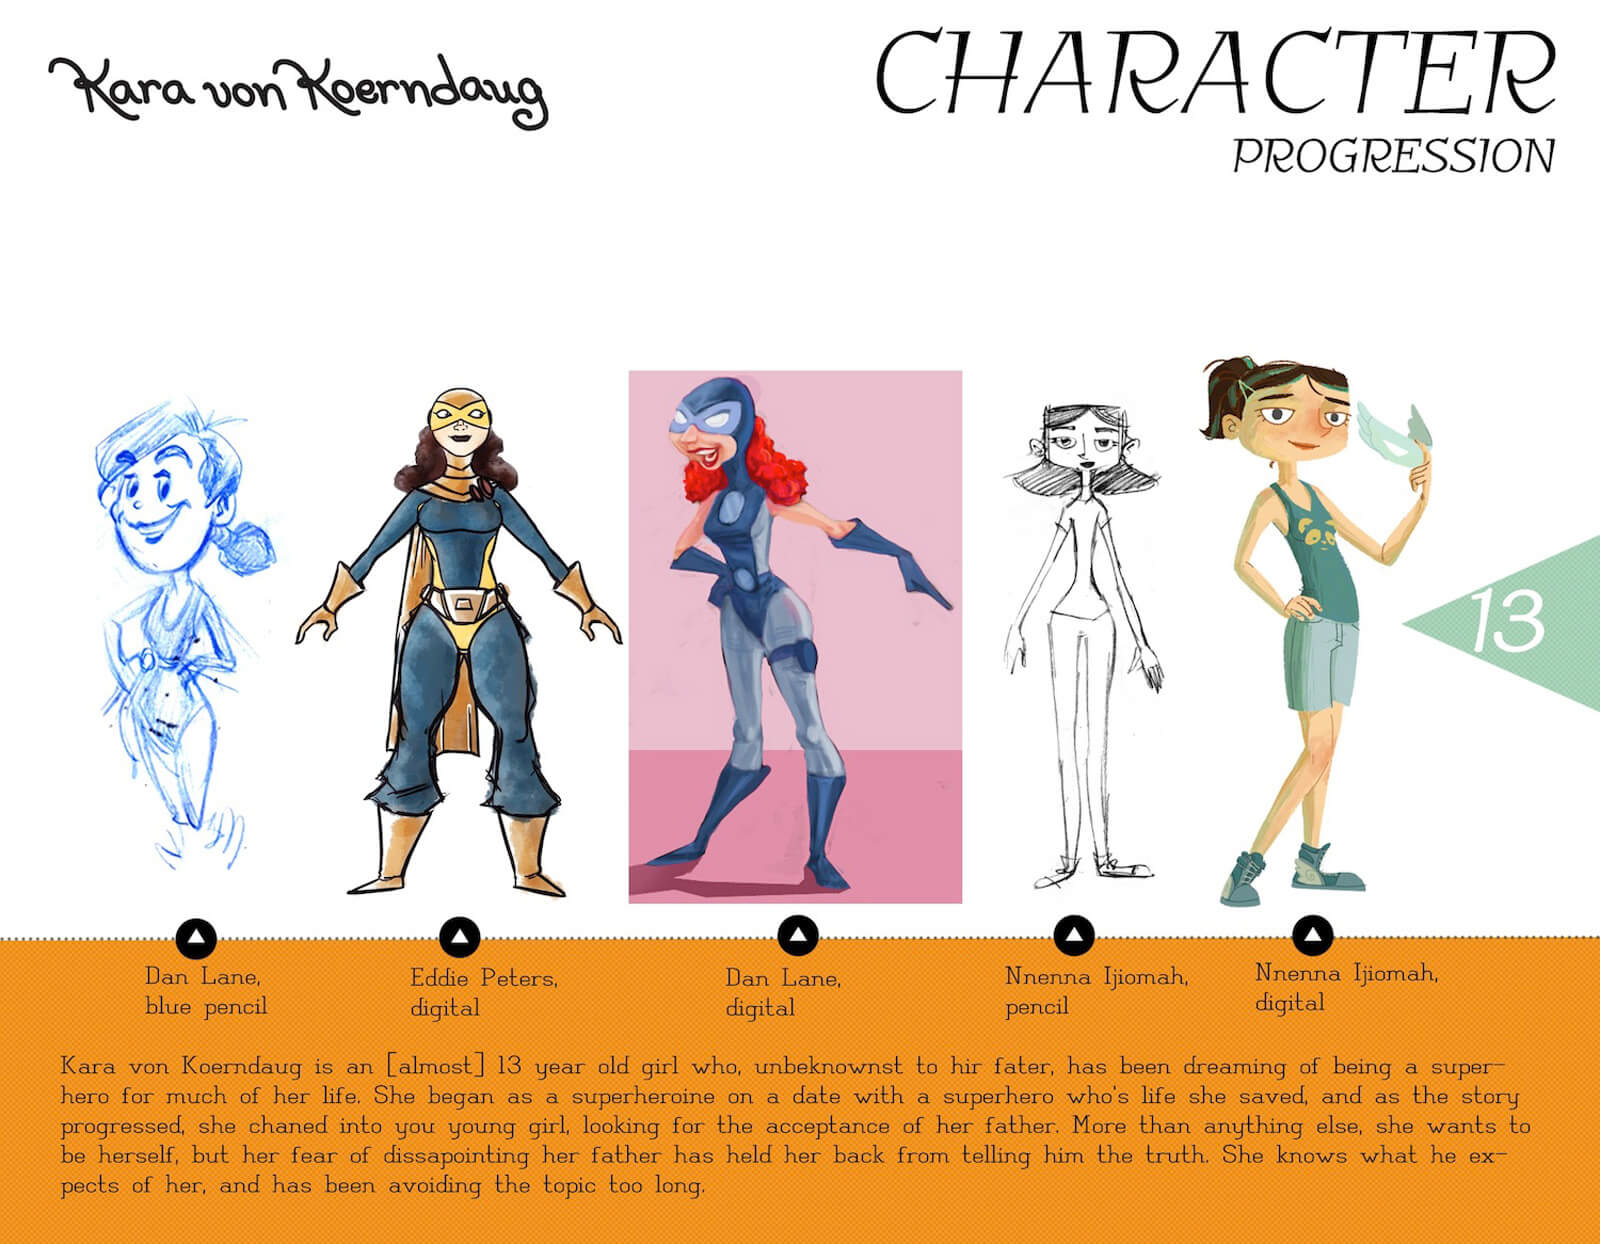 Character progression slide for the character of Kara von Koerndaug, from sketches, to color drawings, to final design